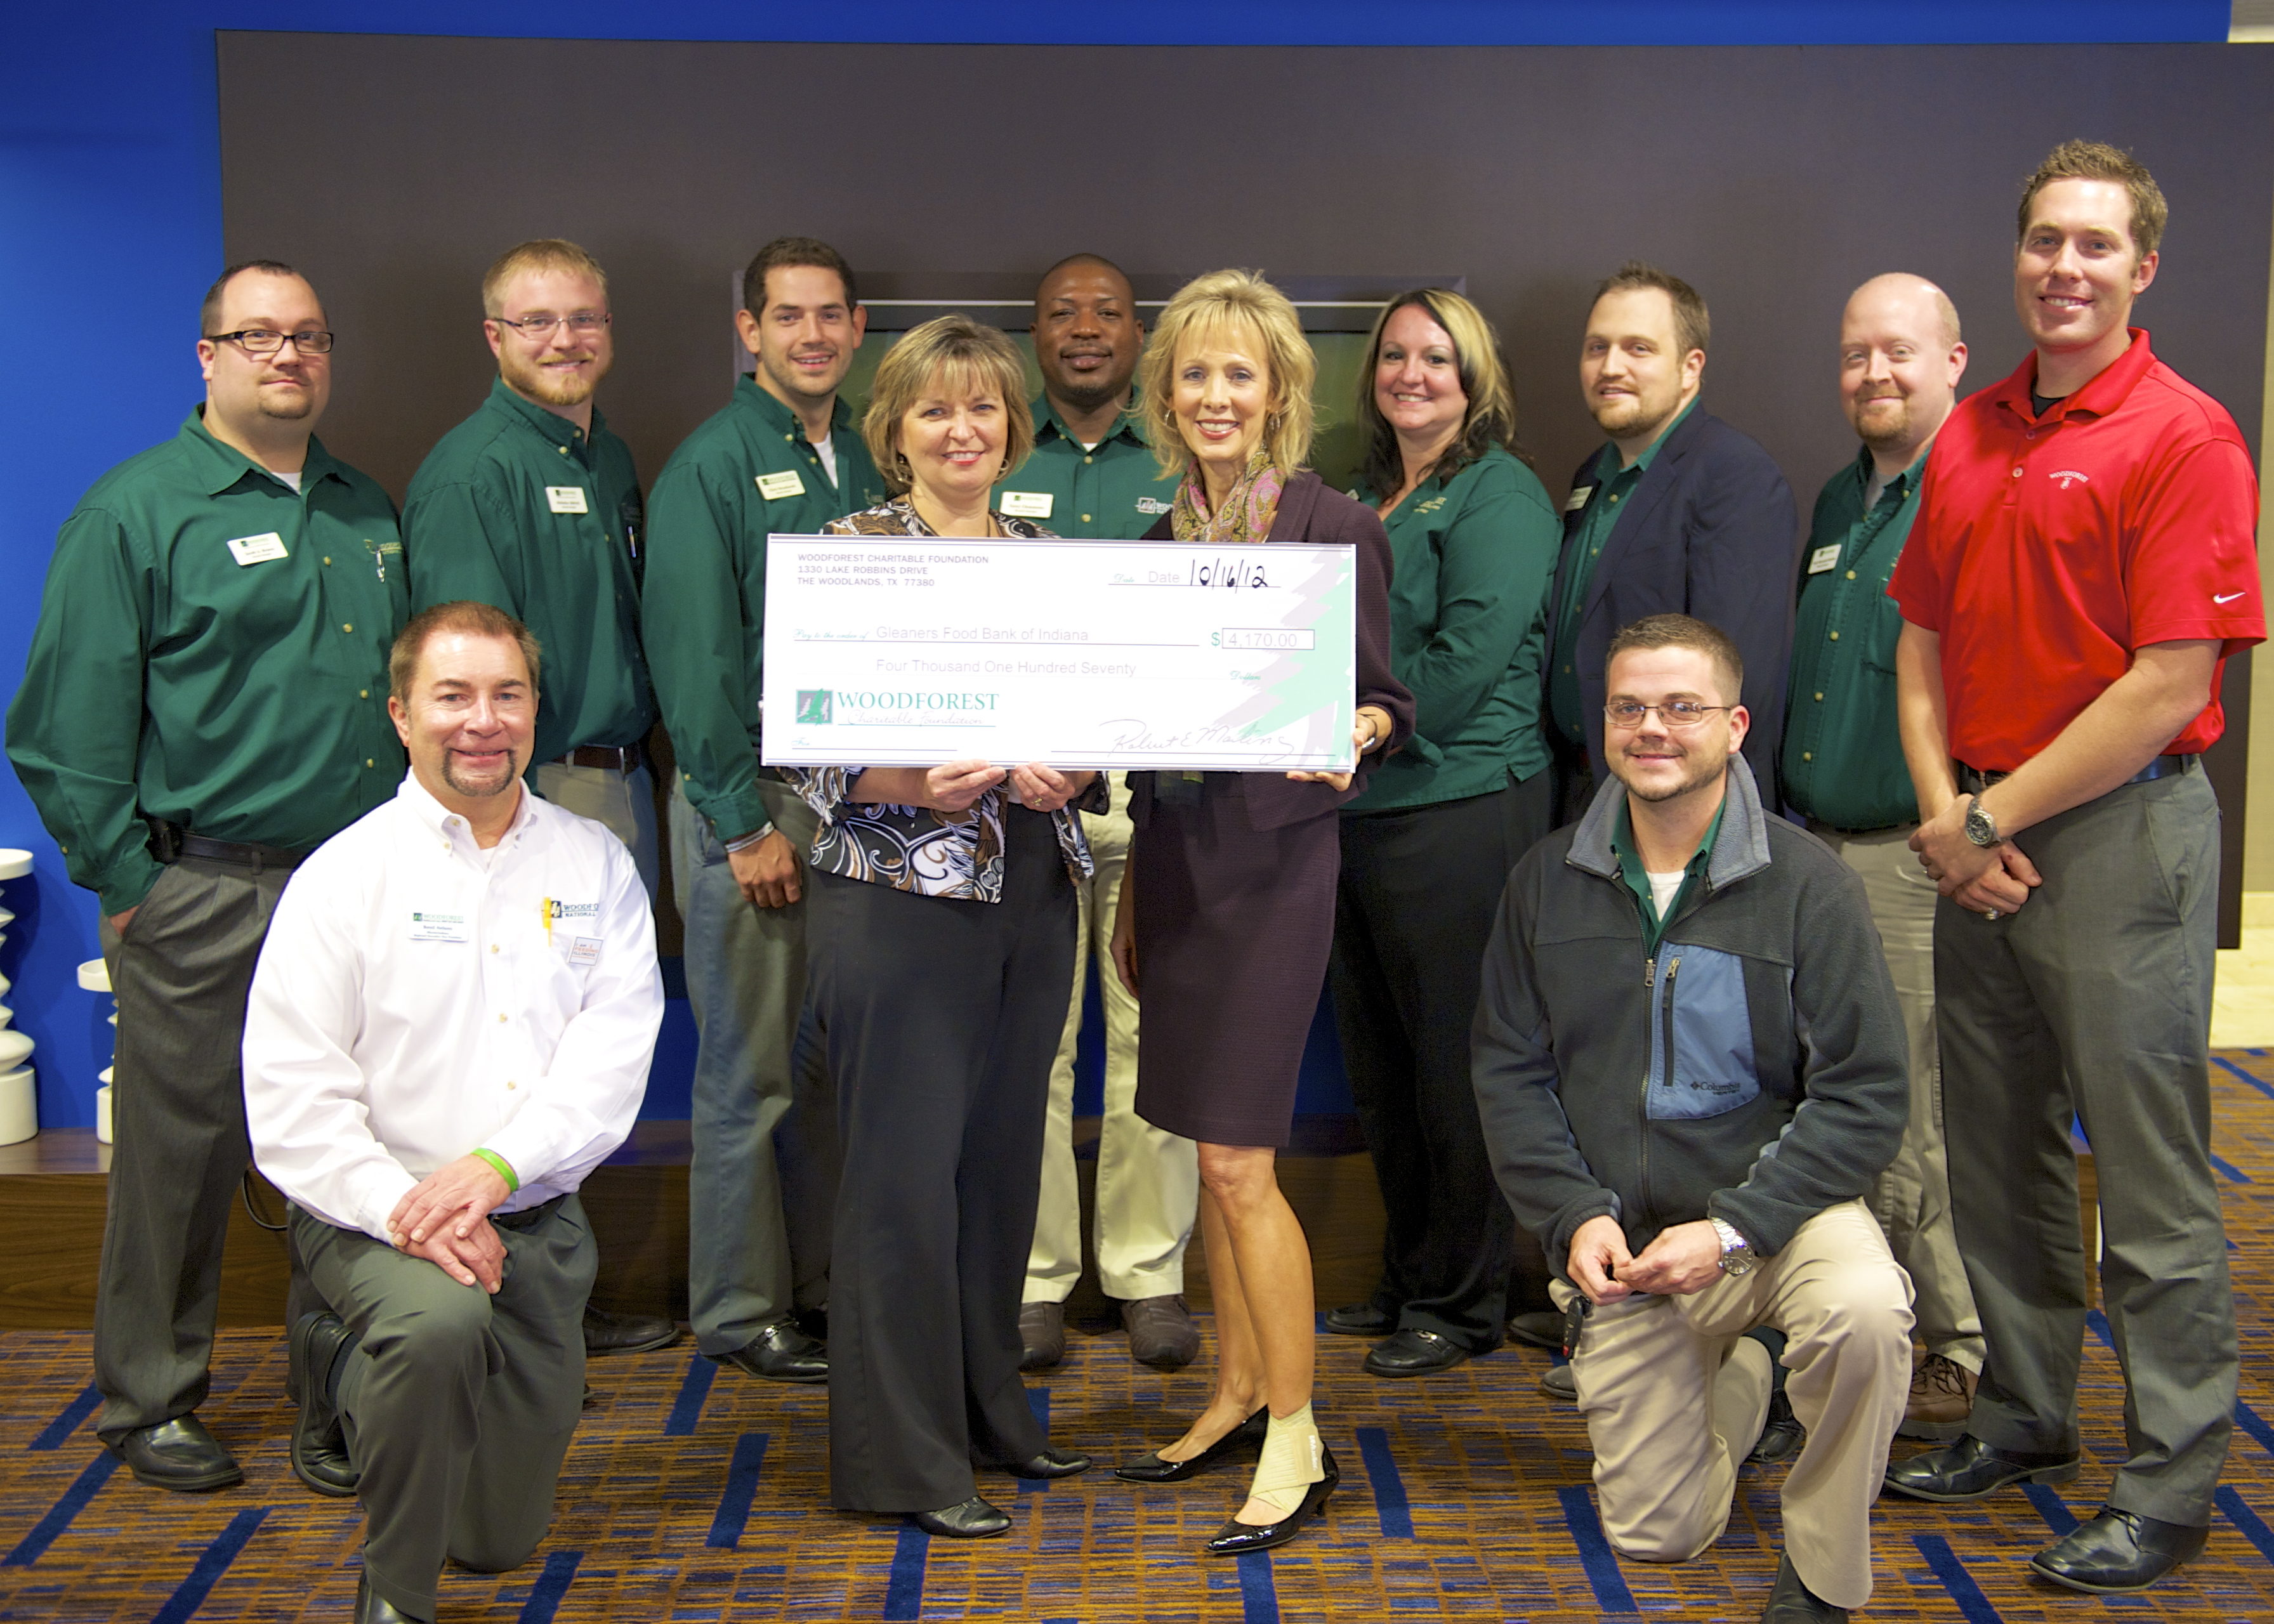 Gleaners Food Bank of Indiana receives $4,170 donation from WCF.